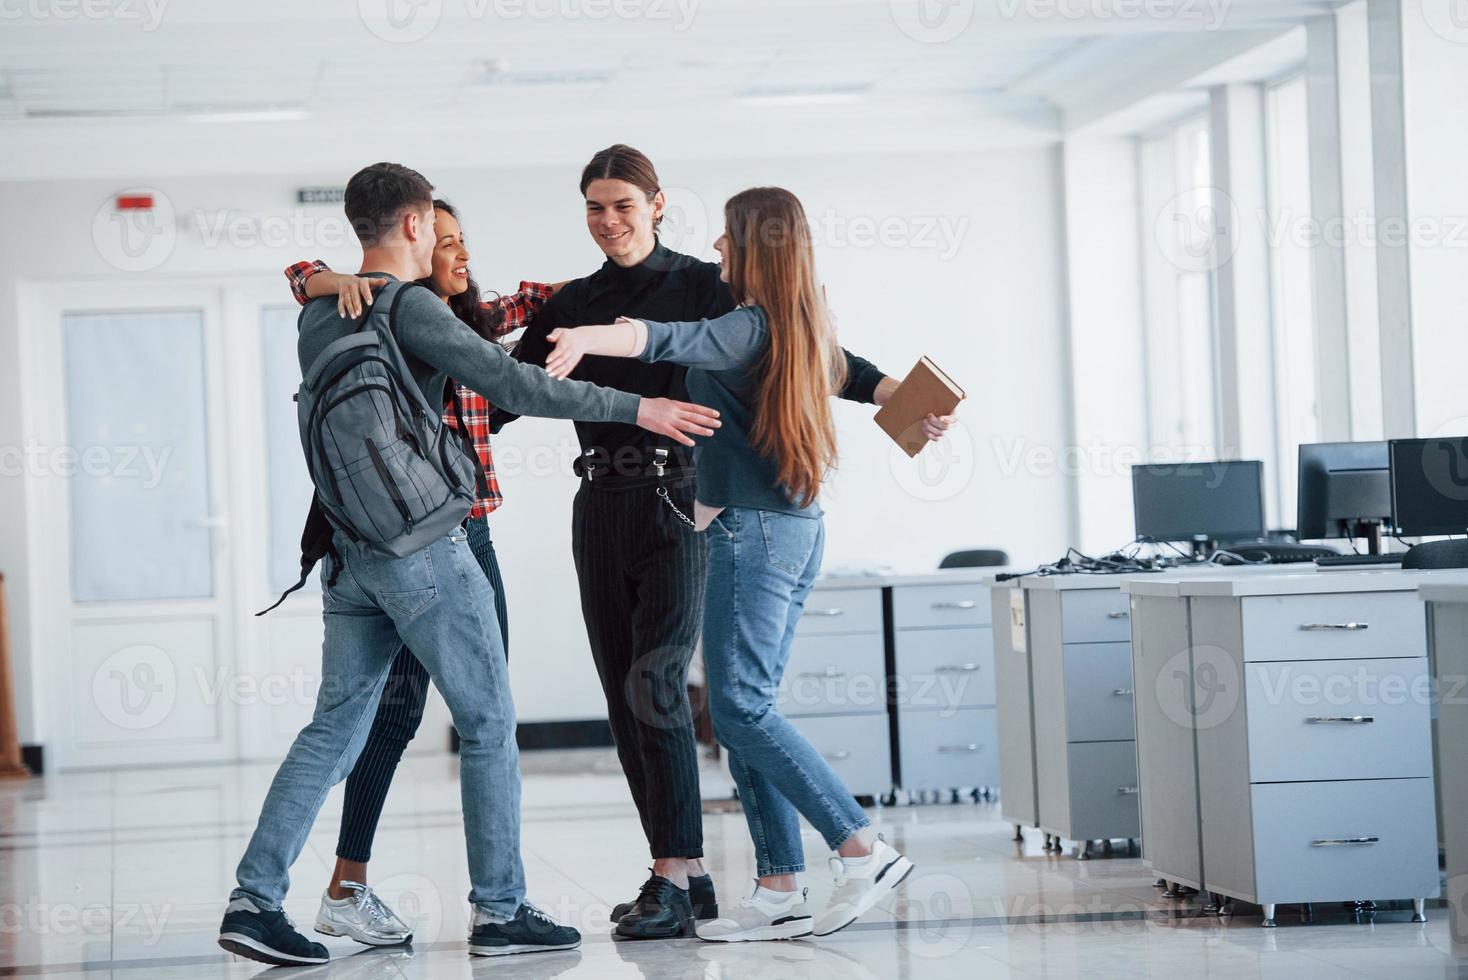 Giving hugs to each other. Group of young people walking in the office at their break time photo